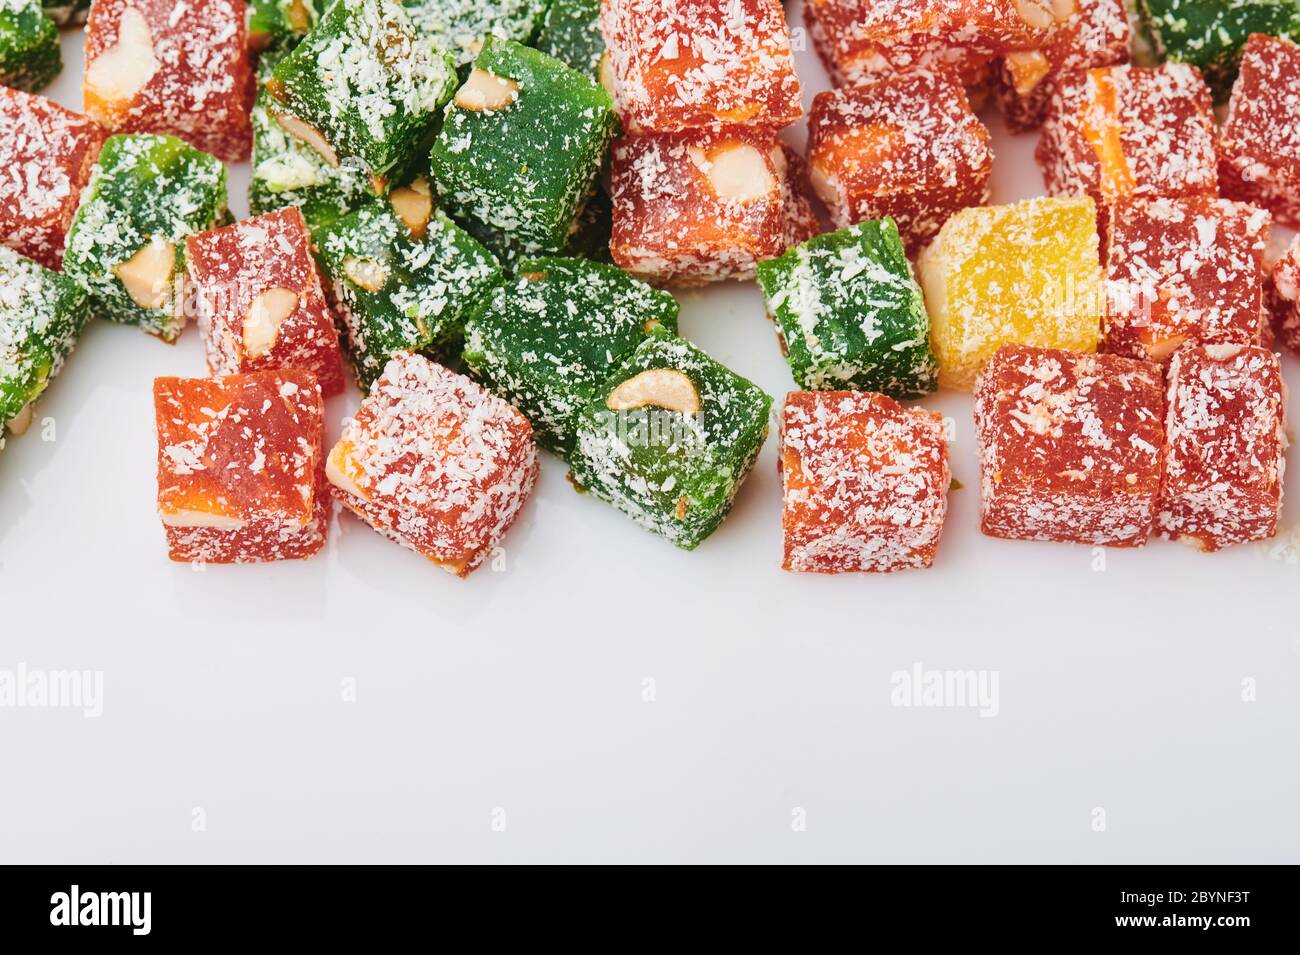 Colorful turkish delight with nuts macro close up view Stock Photo